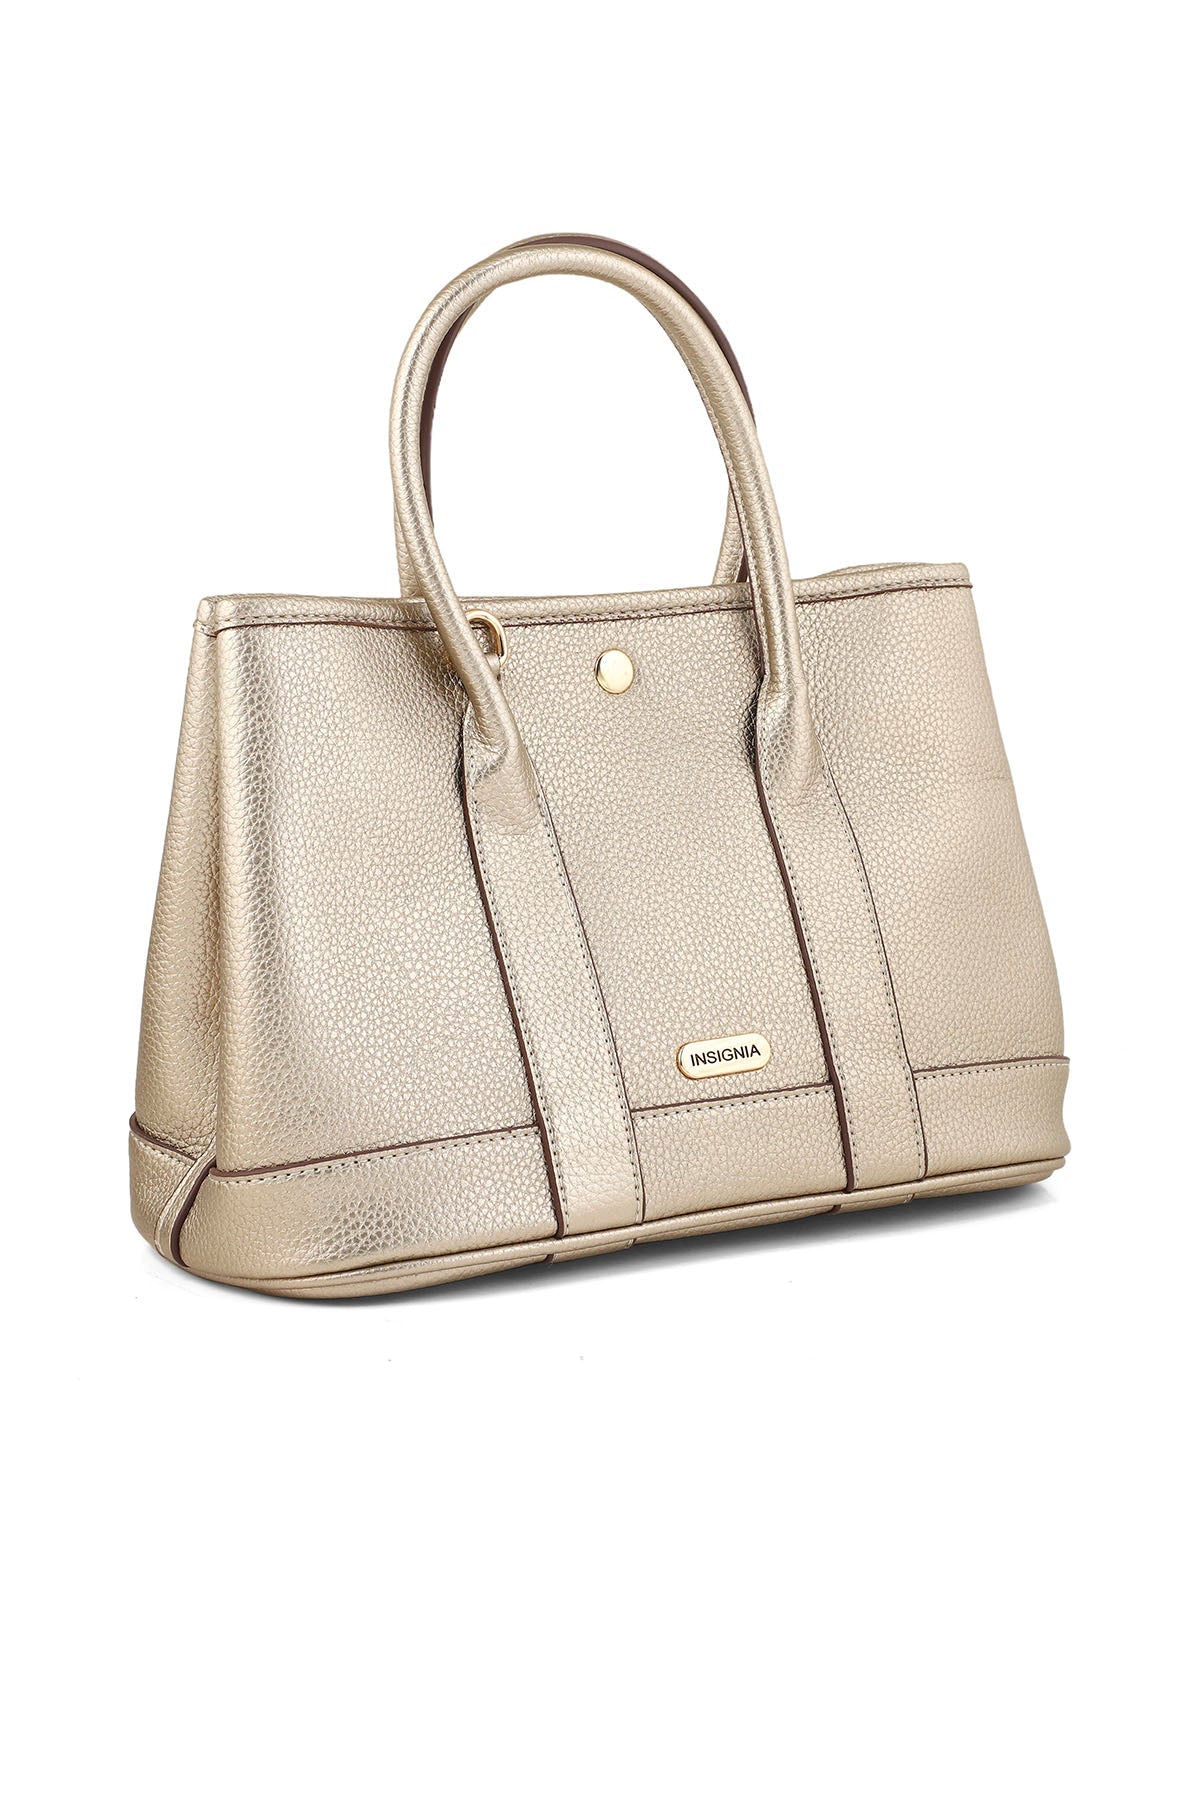 Formal Tote Hand Bags B14906-Golden